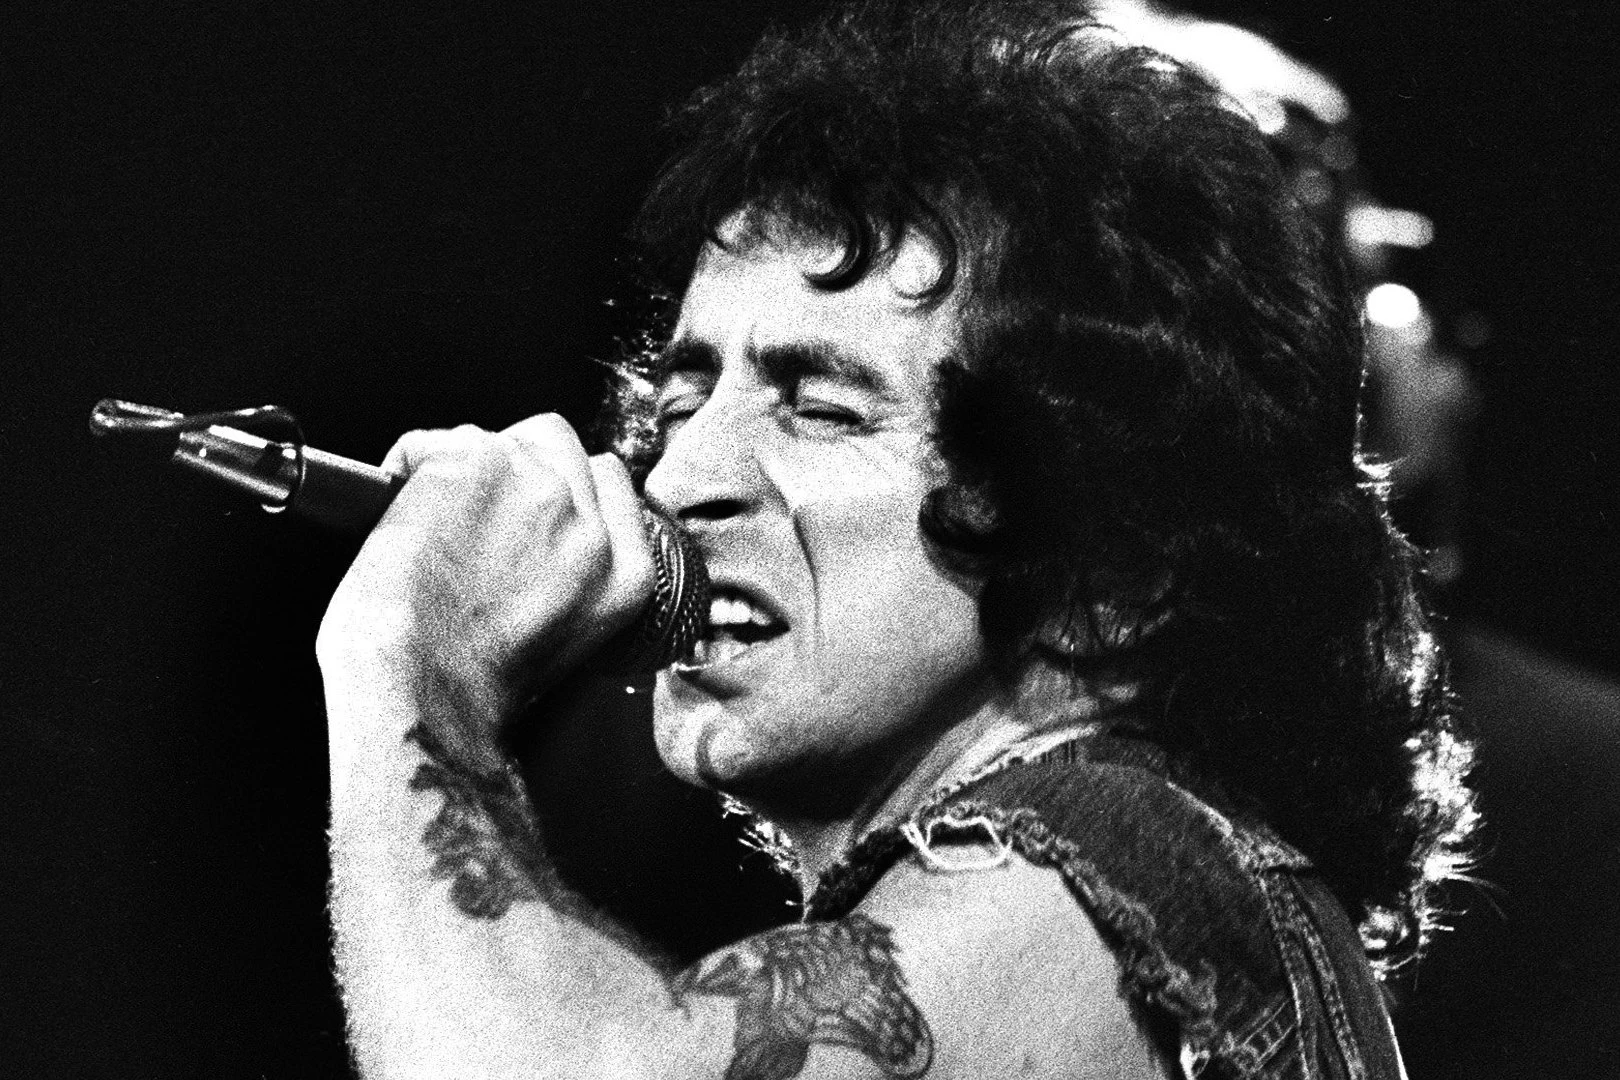 All 57 Bon Scott AC/DC songs ranked in order of greatness